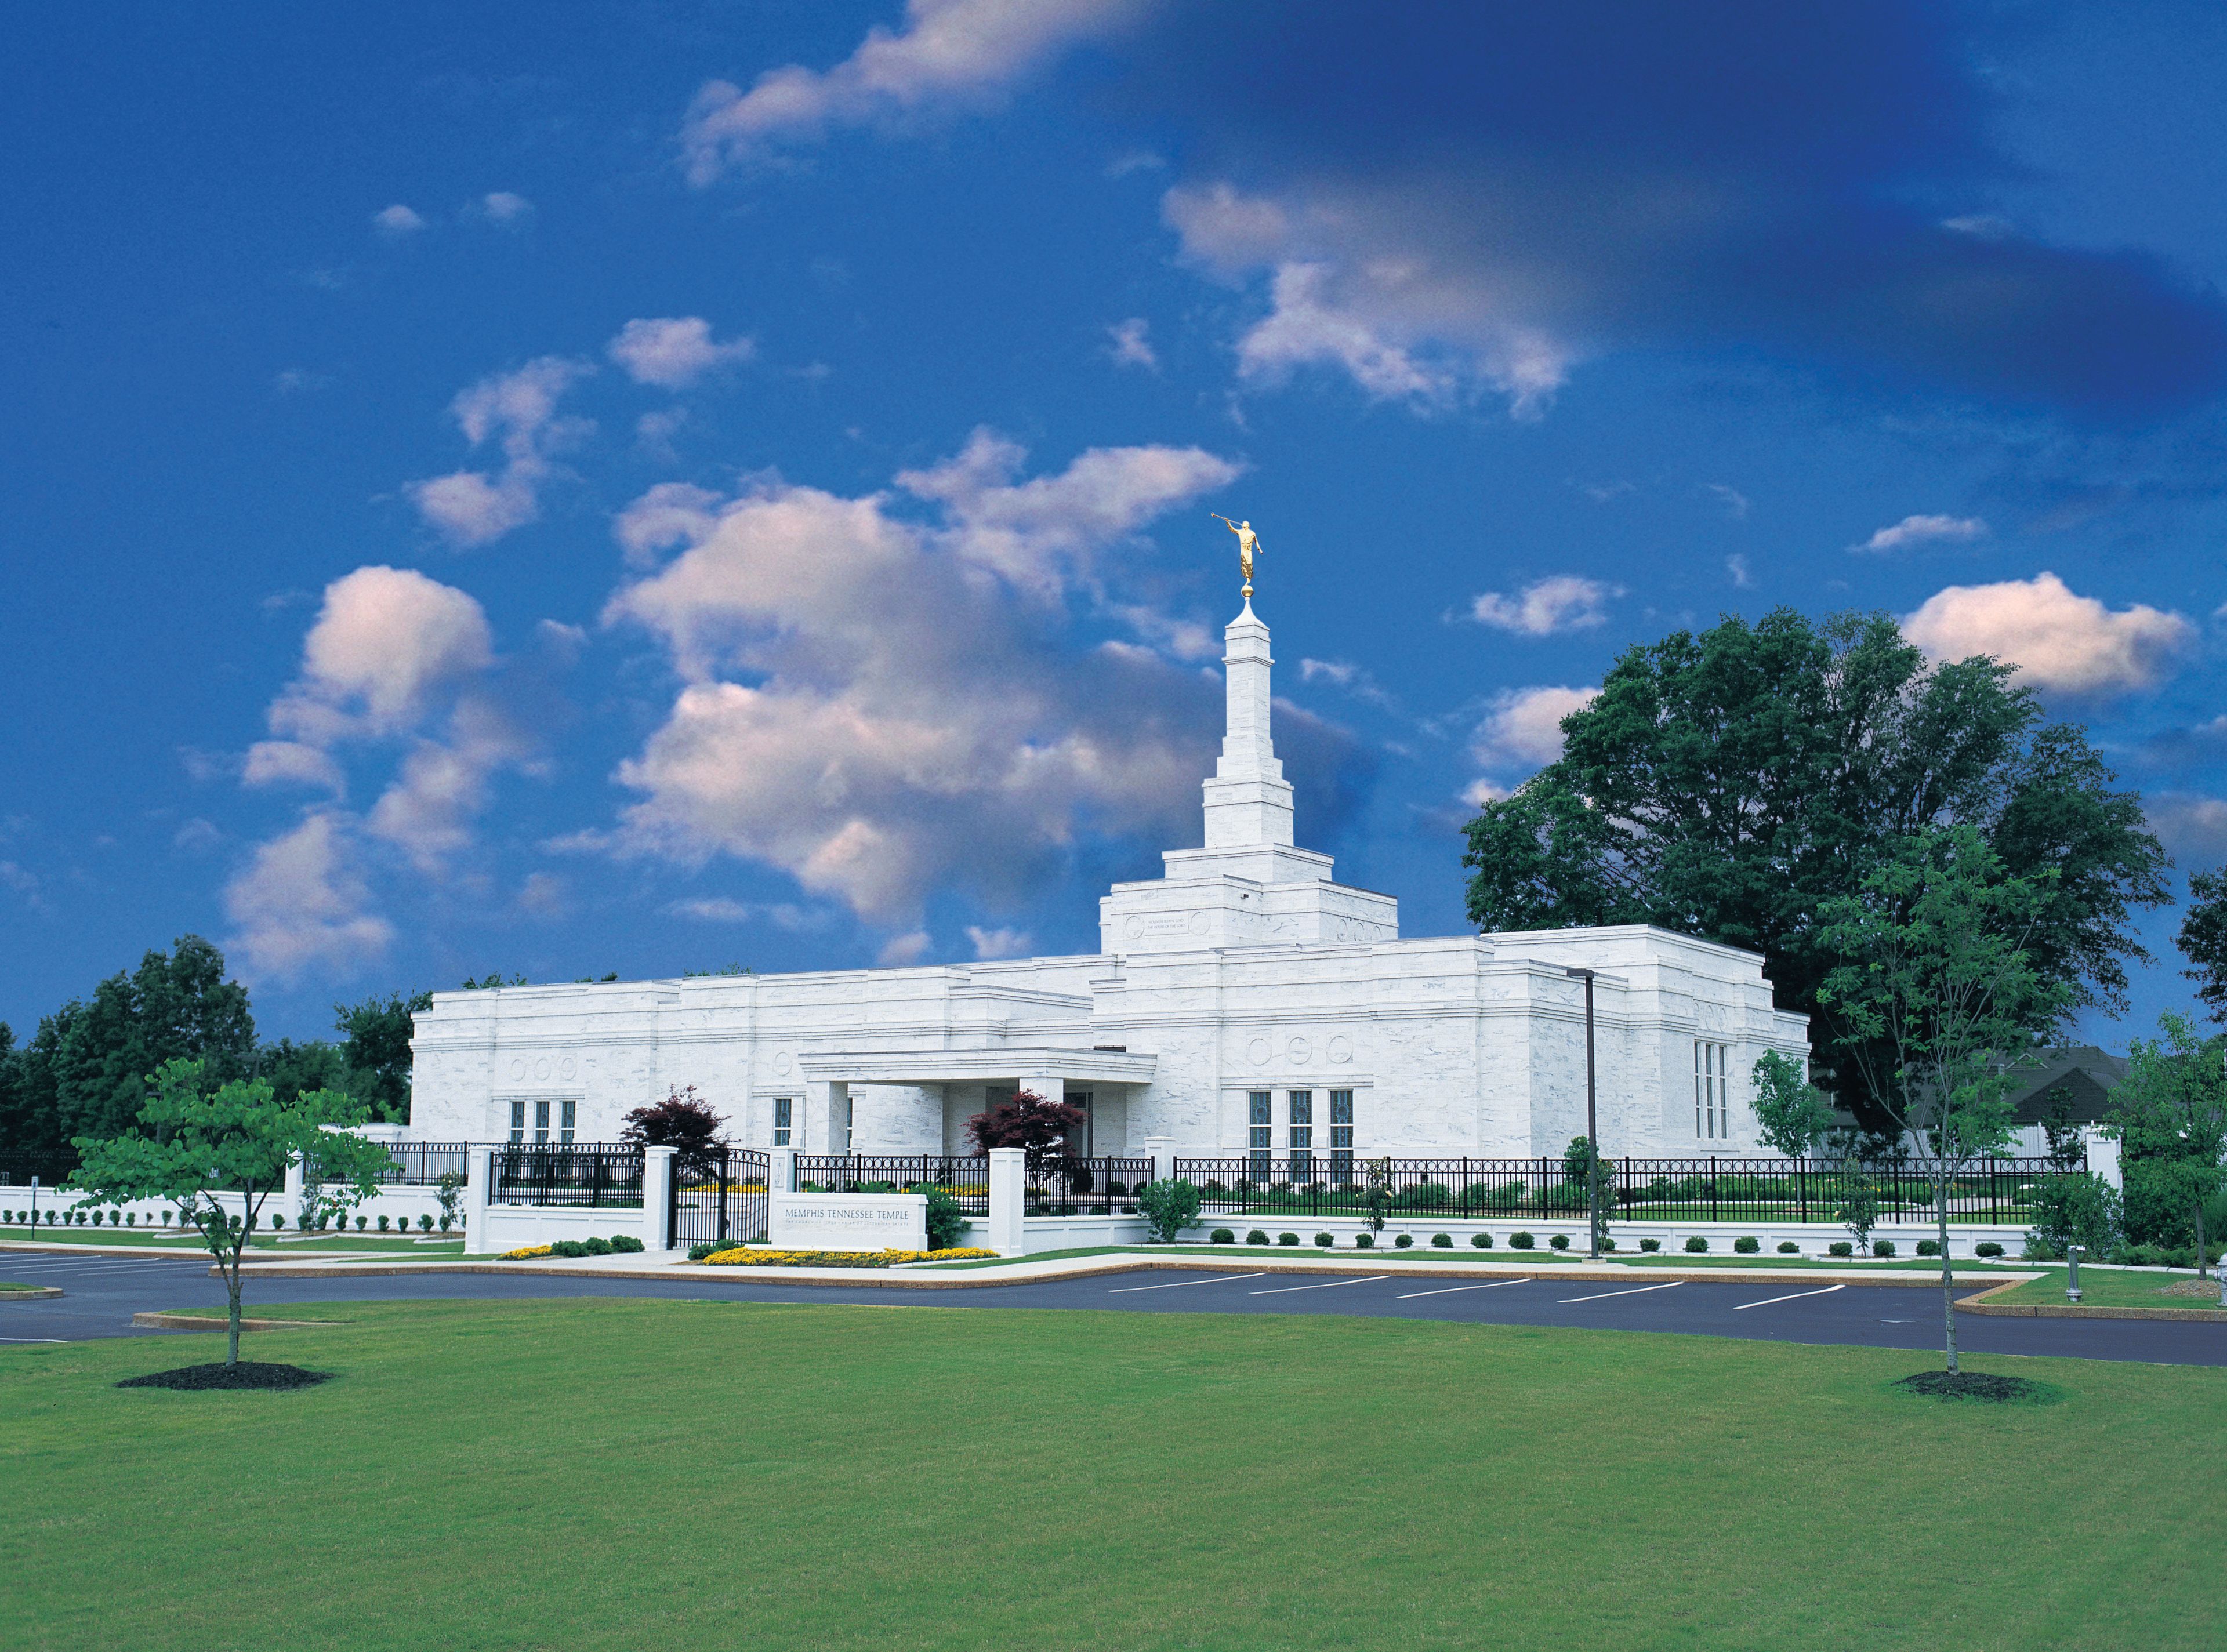 The Memphis Tennessee Temple, including the entrance and scenery.